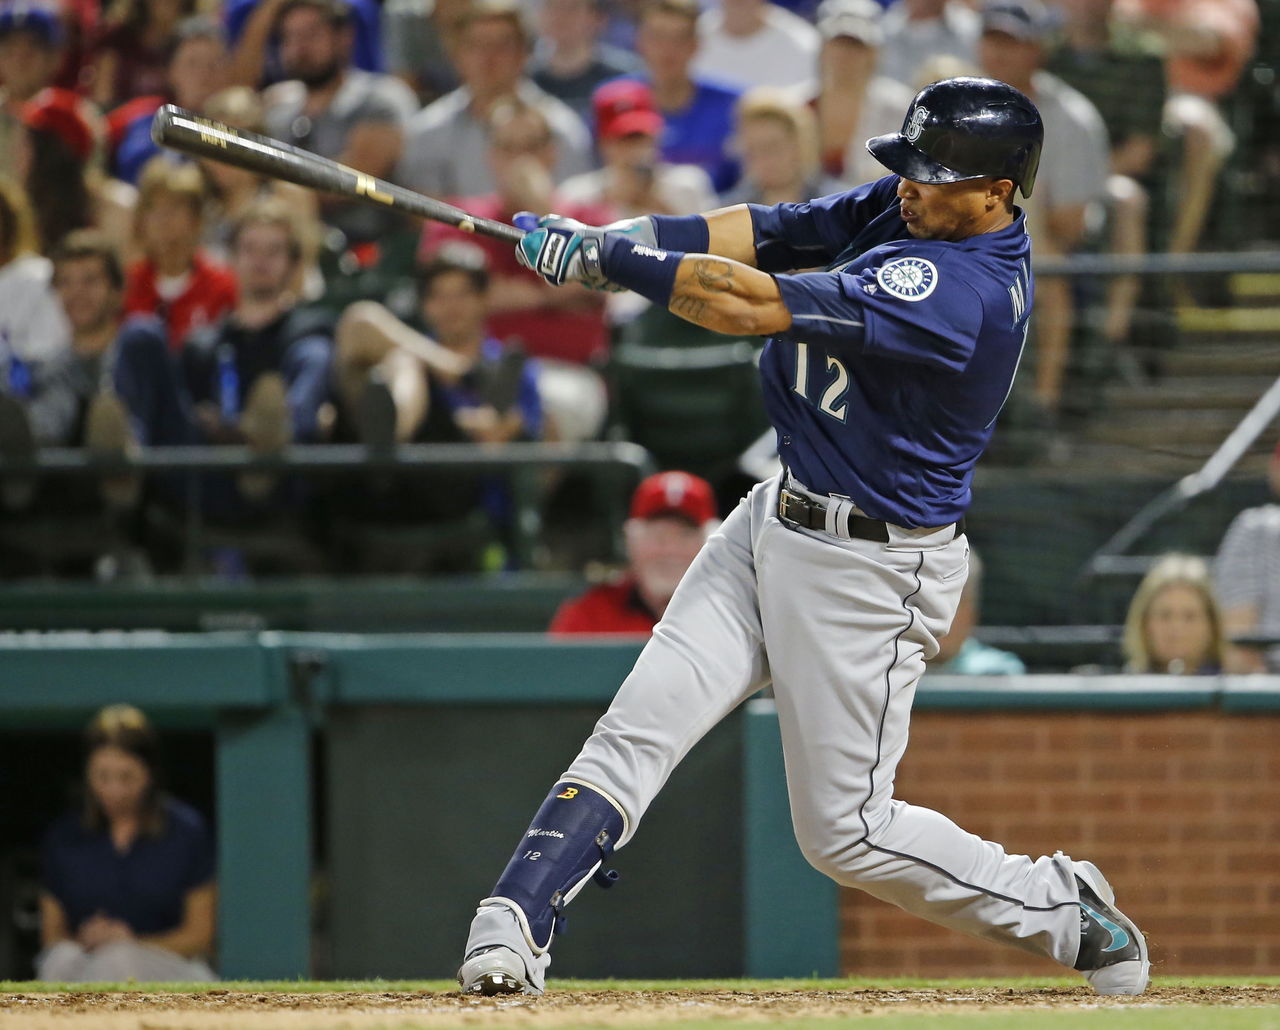 Mariners center fielder Leonys Martin had four hits in 10 at bats, driving in three runs in the three-game series against the Rangers.